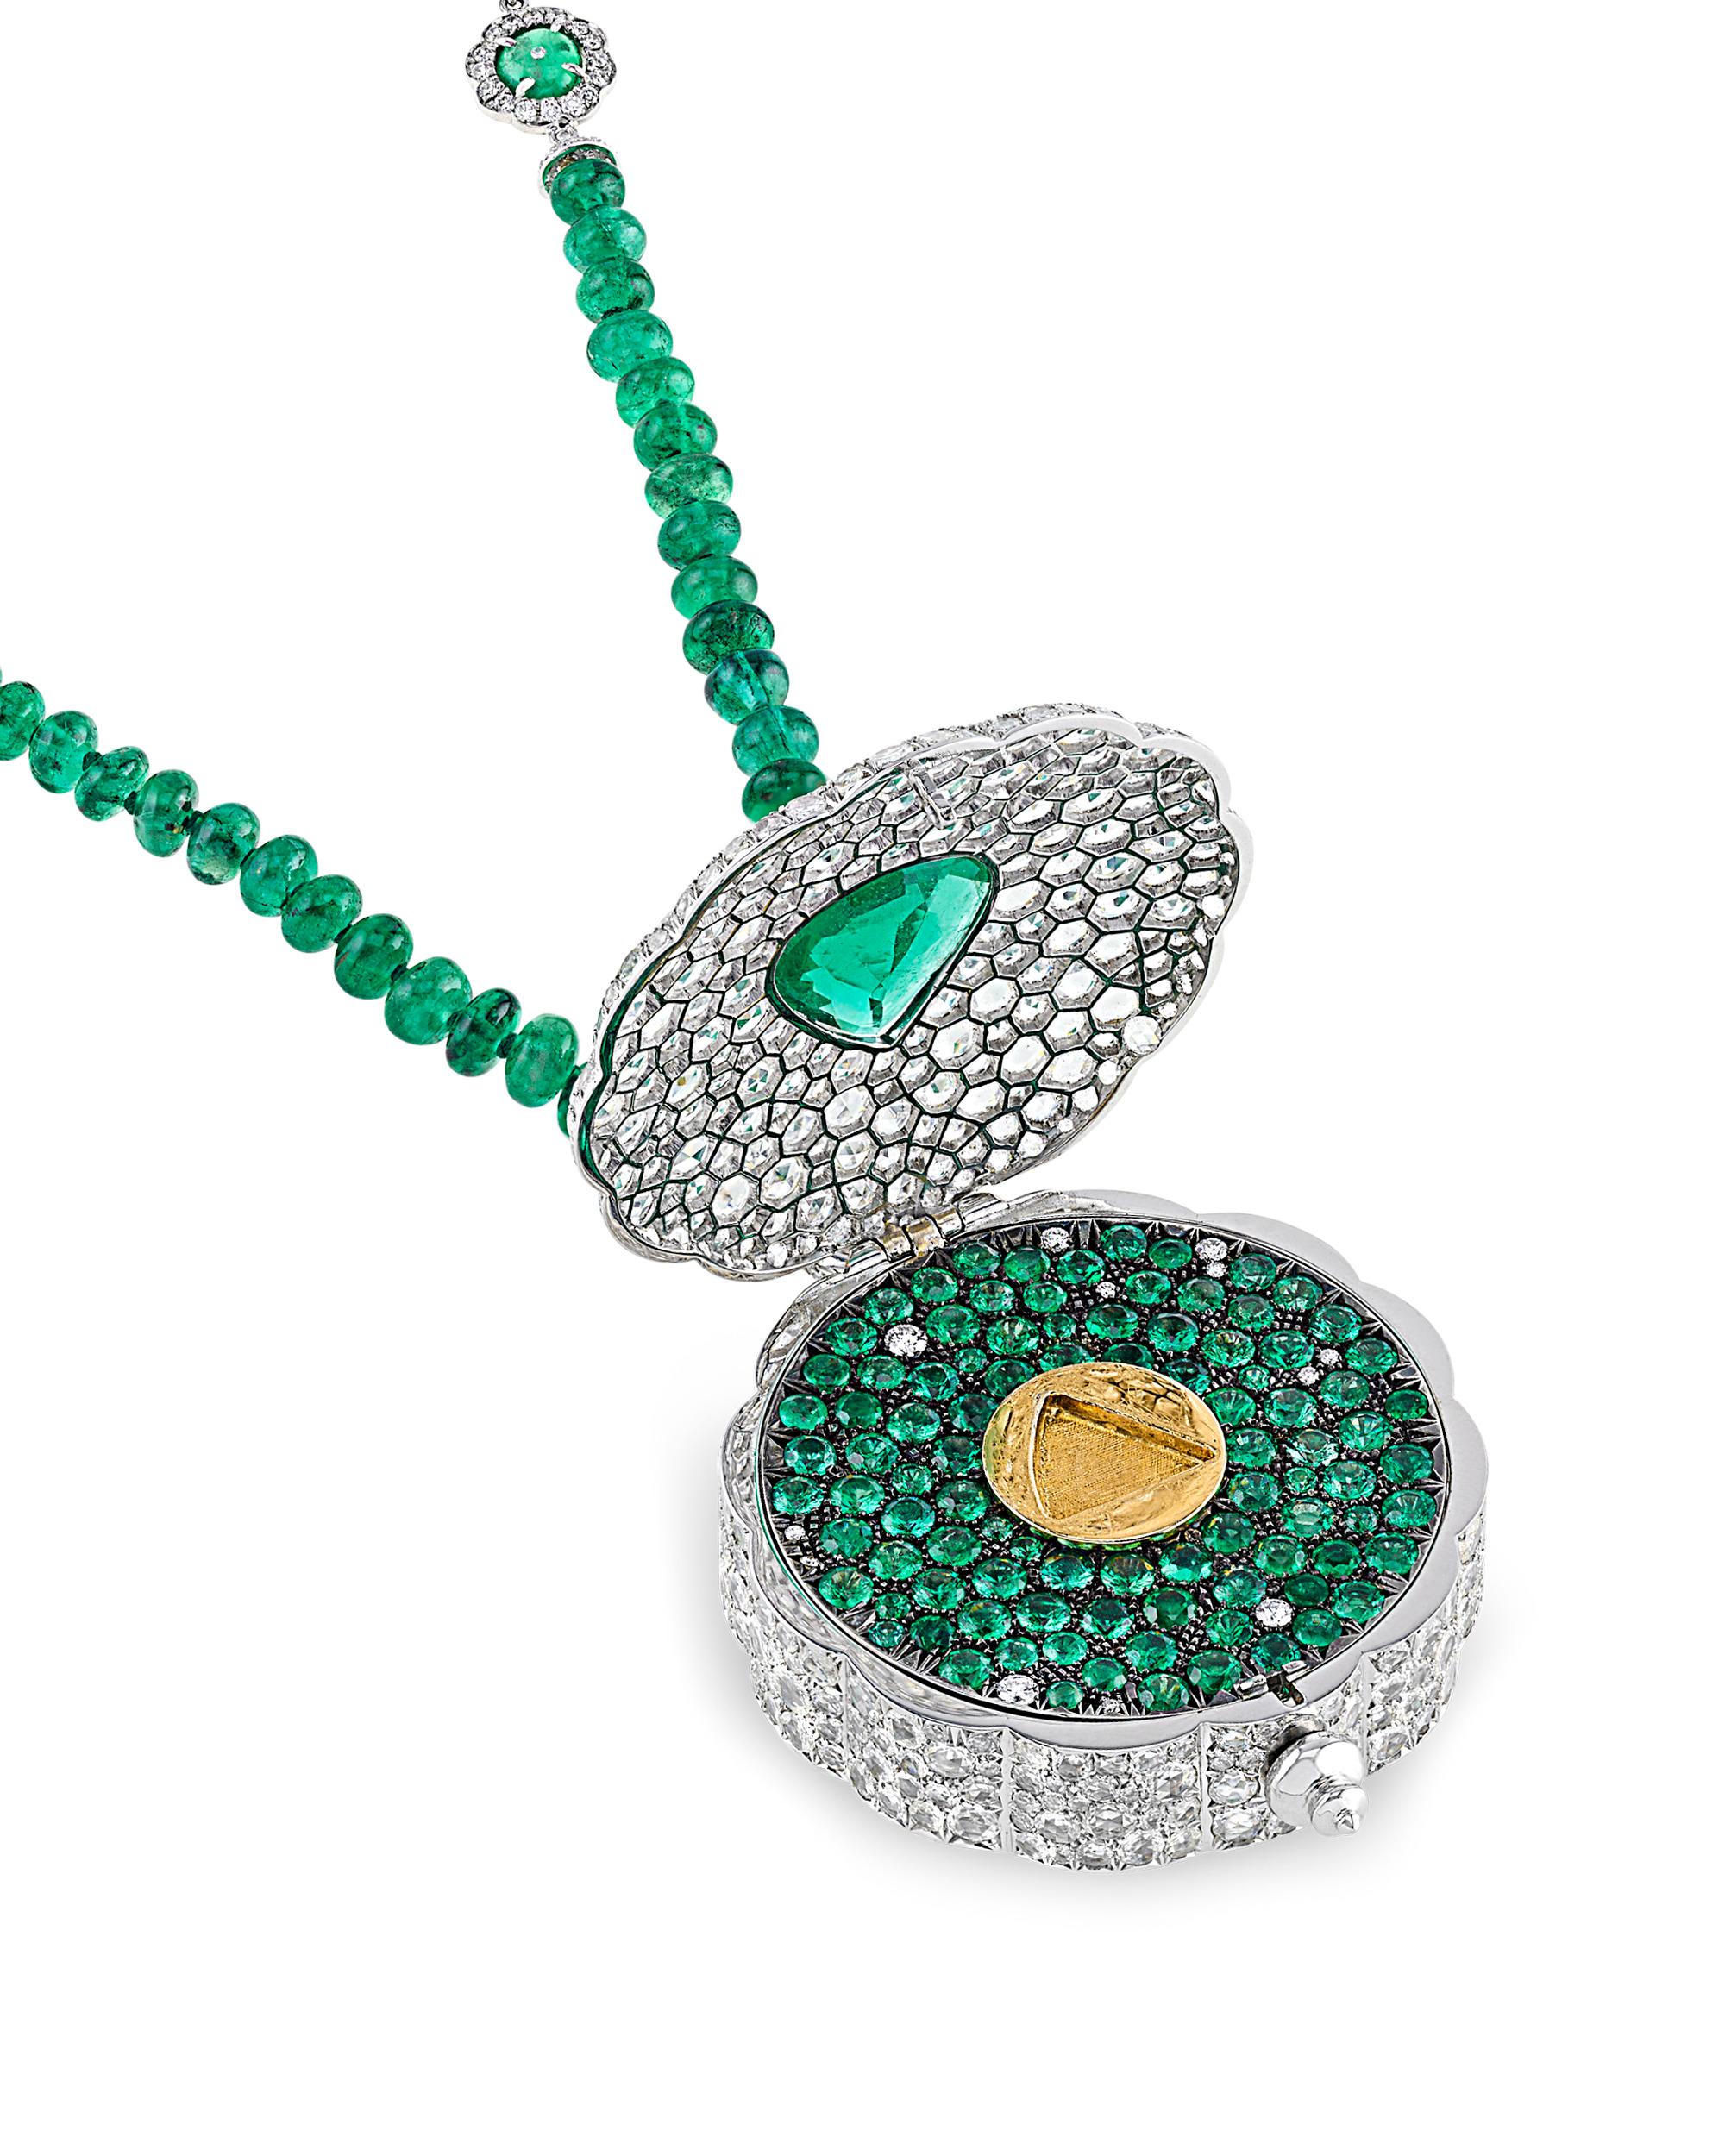 This extraordinary 18K white gold emerald and diamond necklace and ring set exudes an intriguing charm. The ring's fan shape provides a clue to a surprise within the pendant; the pendant contains a secret compartment that can only be accessed with